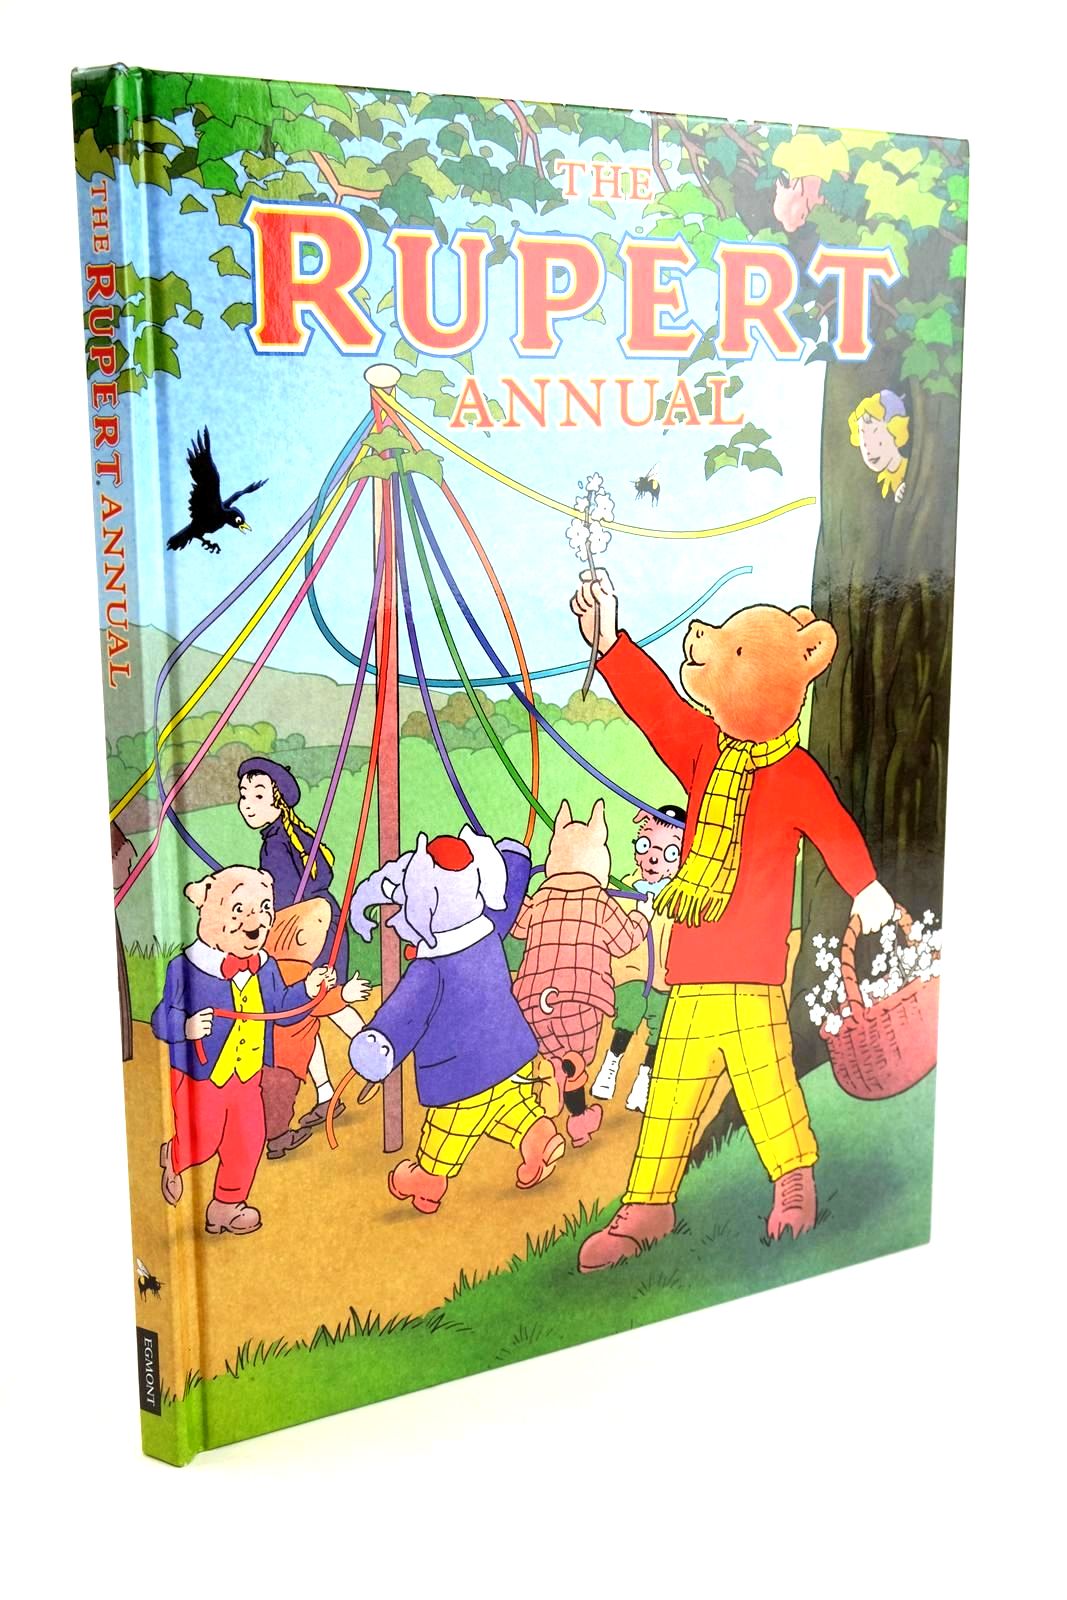 Photo of RUPERT ANNUAL 2018- Stock Number: 1323532